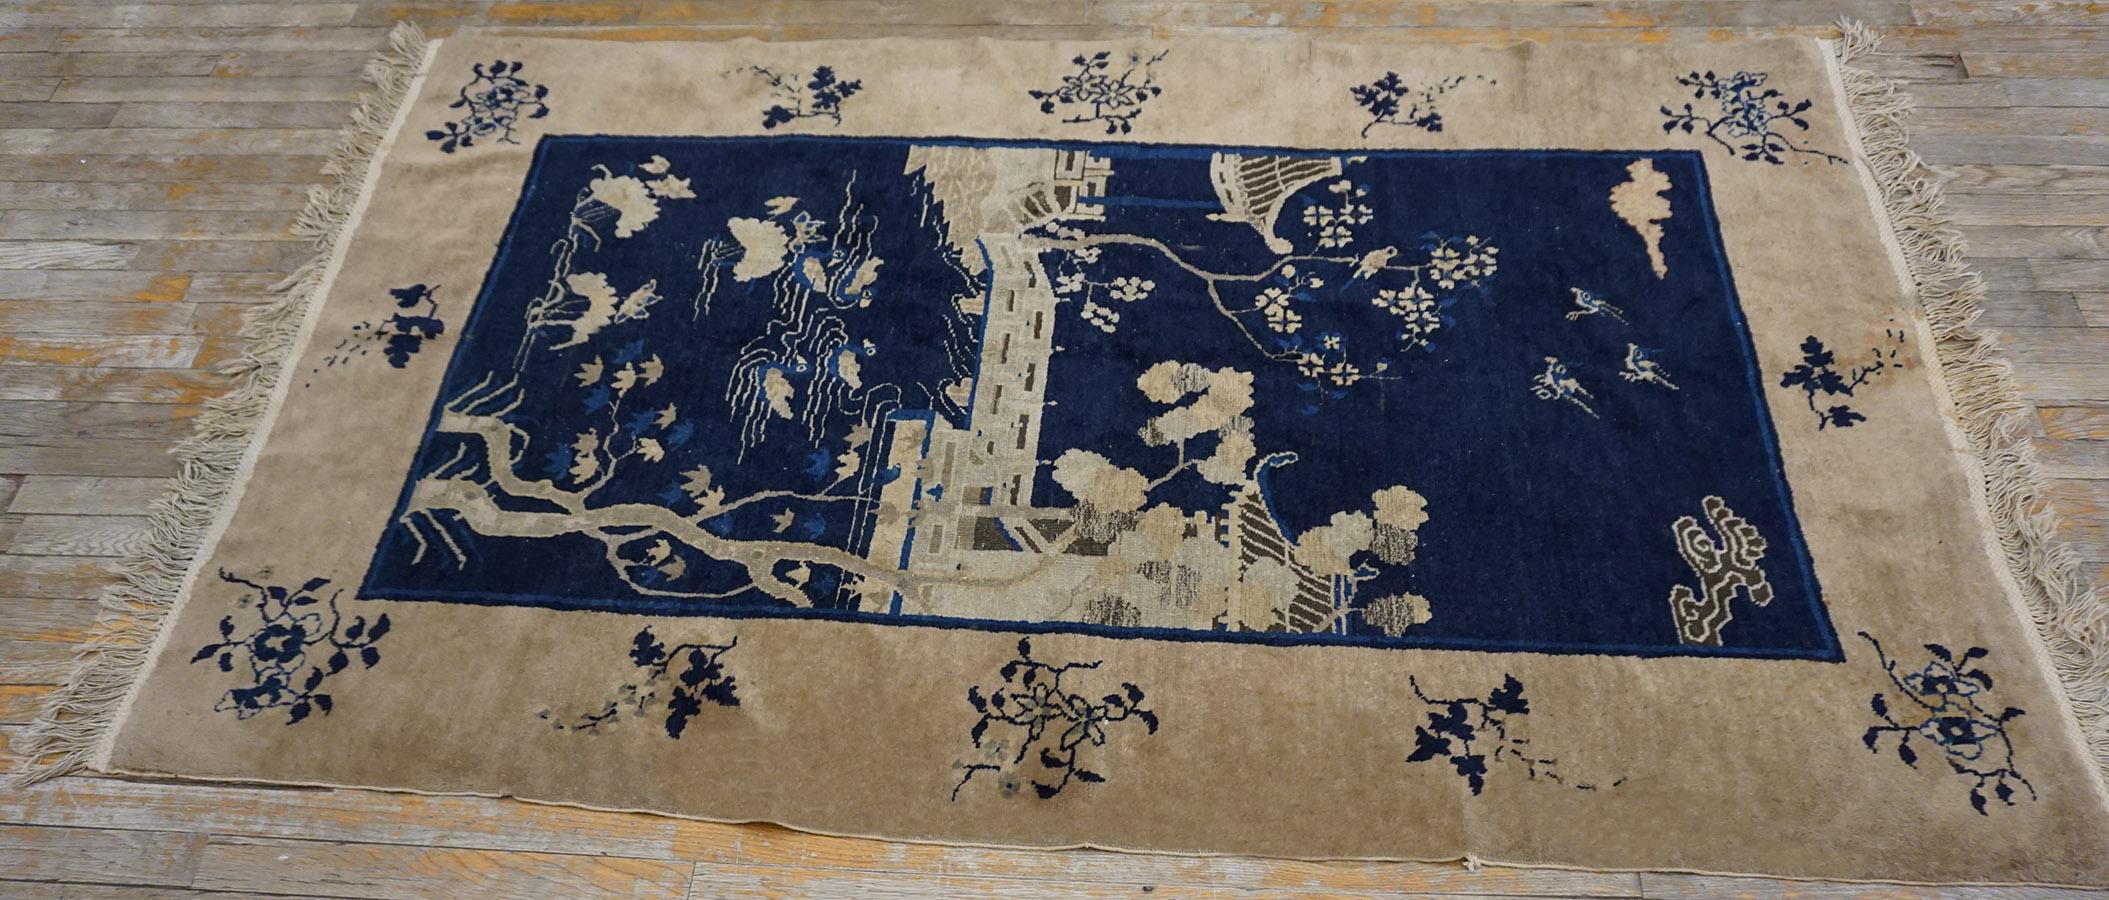 Early 20th Century Chinese Carpet ( 4' x 6'8